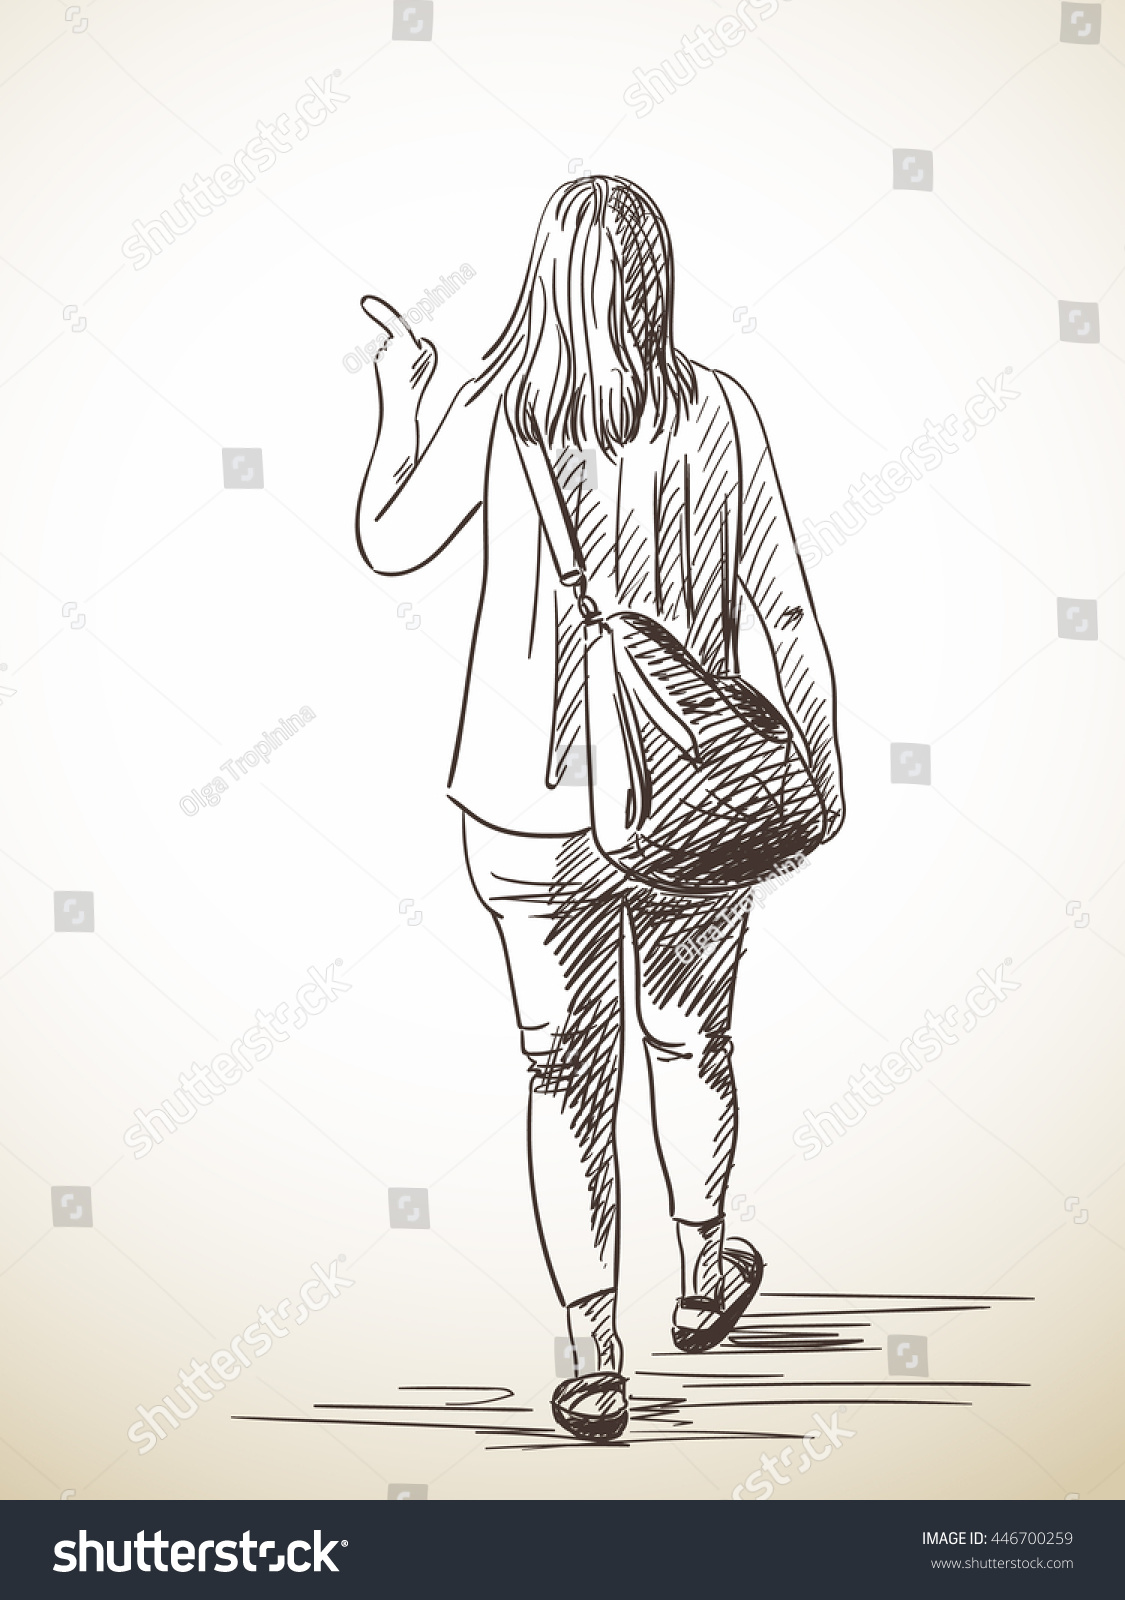 Sketch Of Woman Walking Away And Pointing With Finger, Hand Drawn